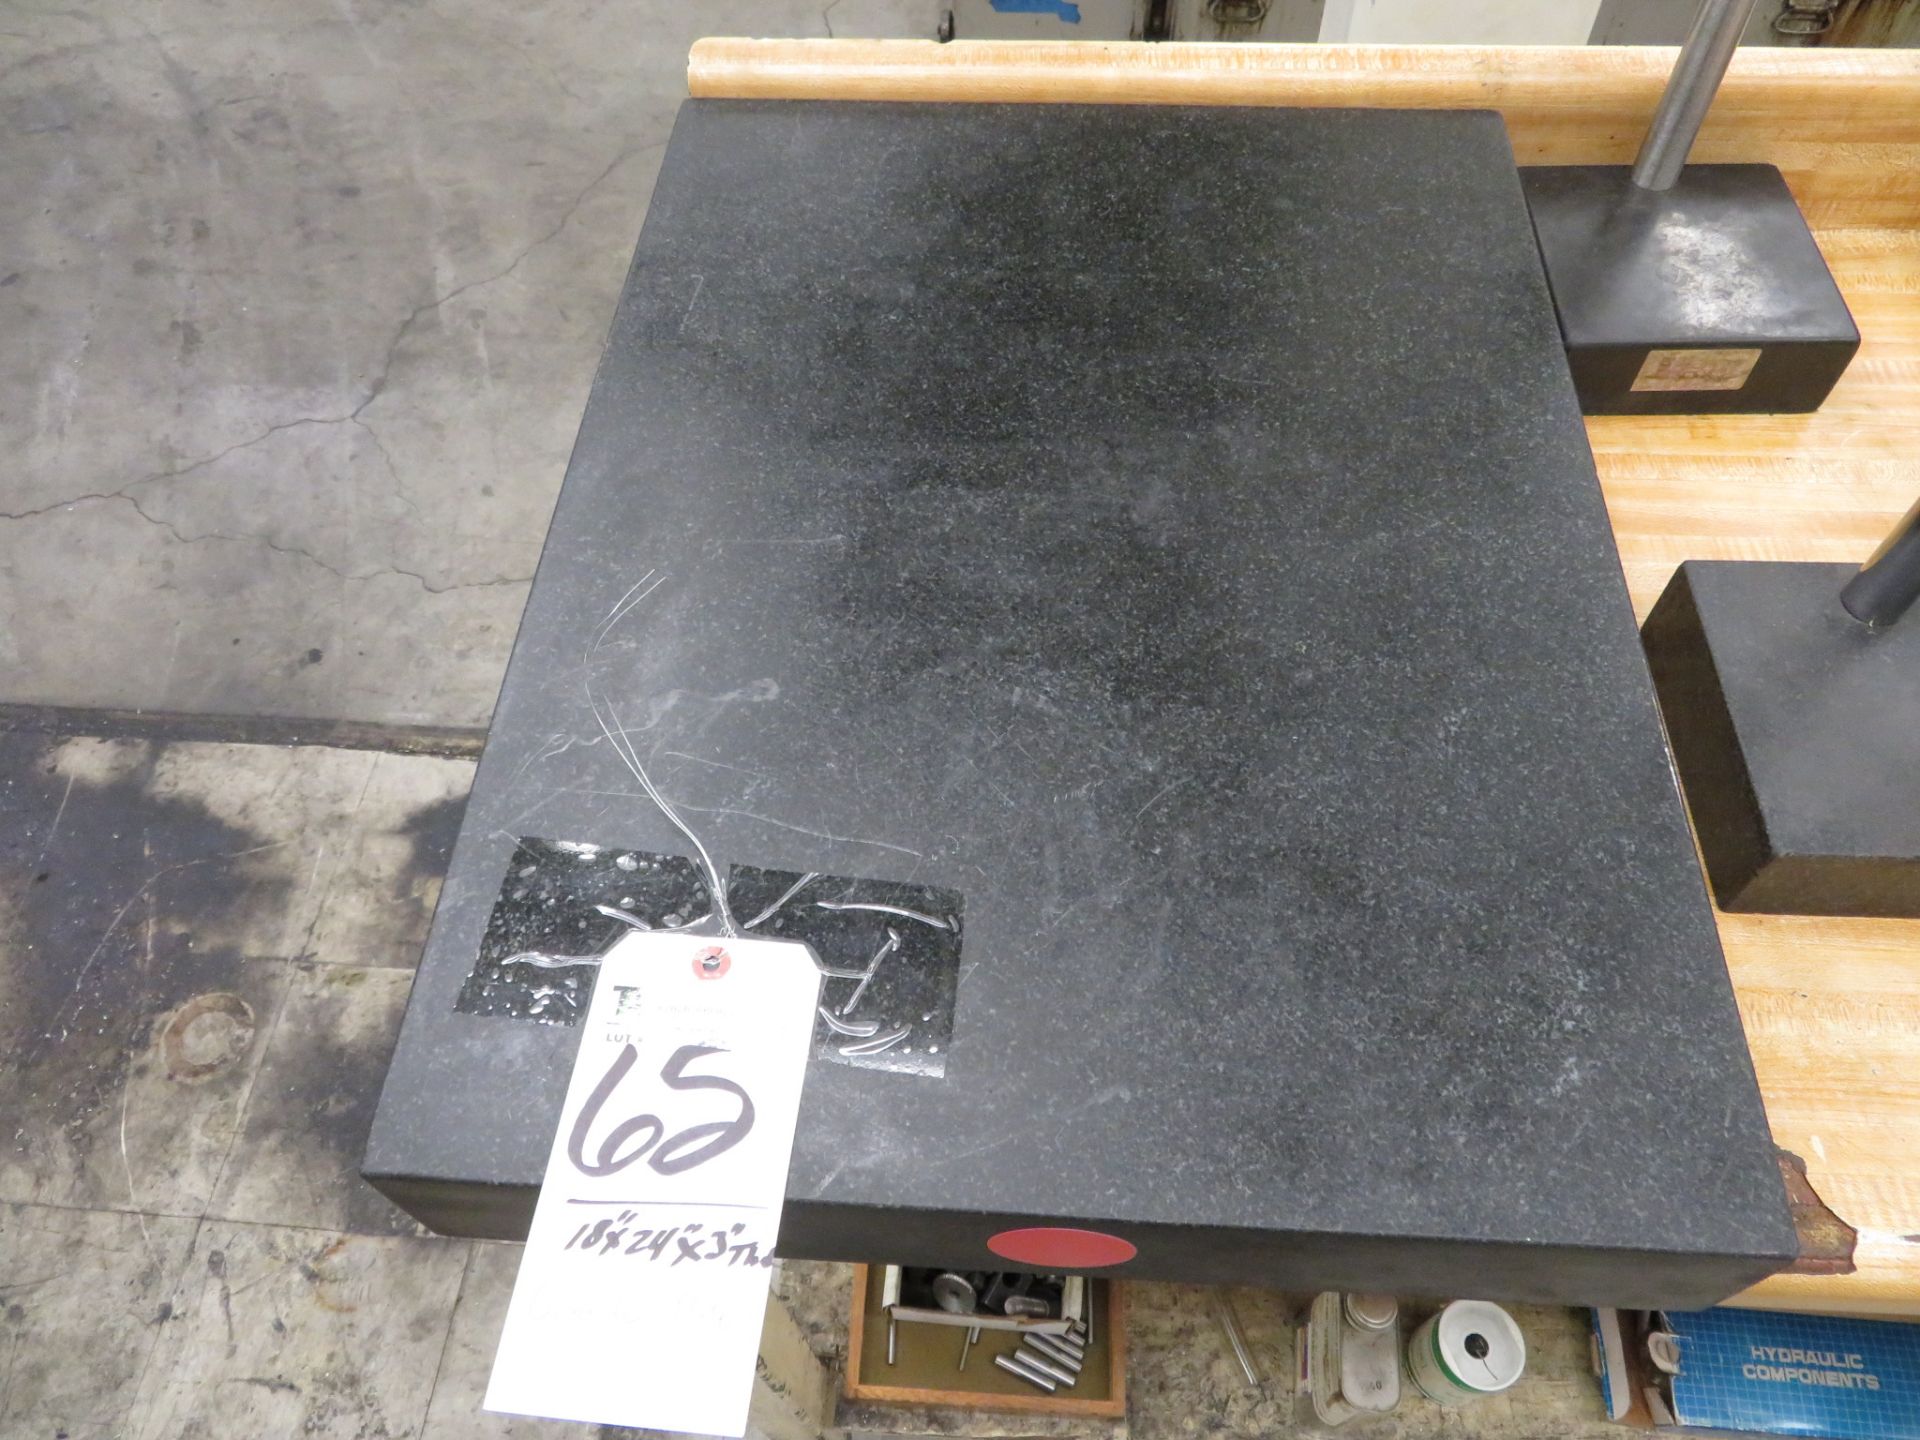 18" x 24" x 3" Thick Granite Surface Plate